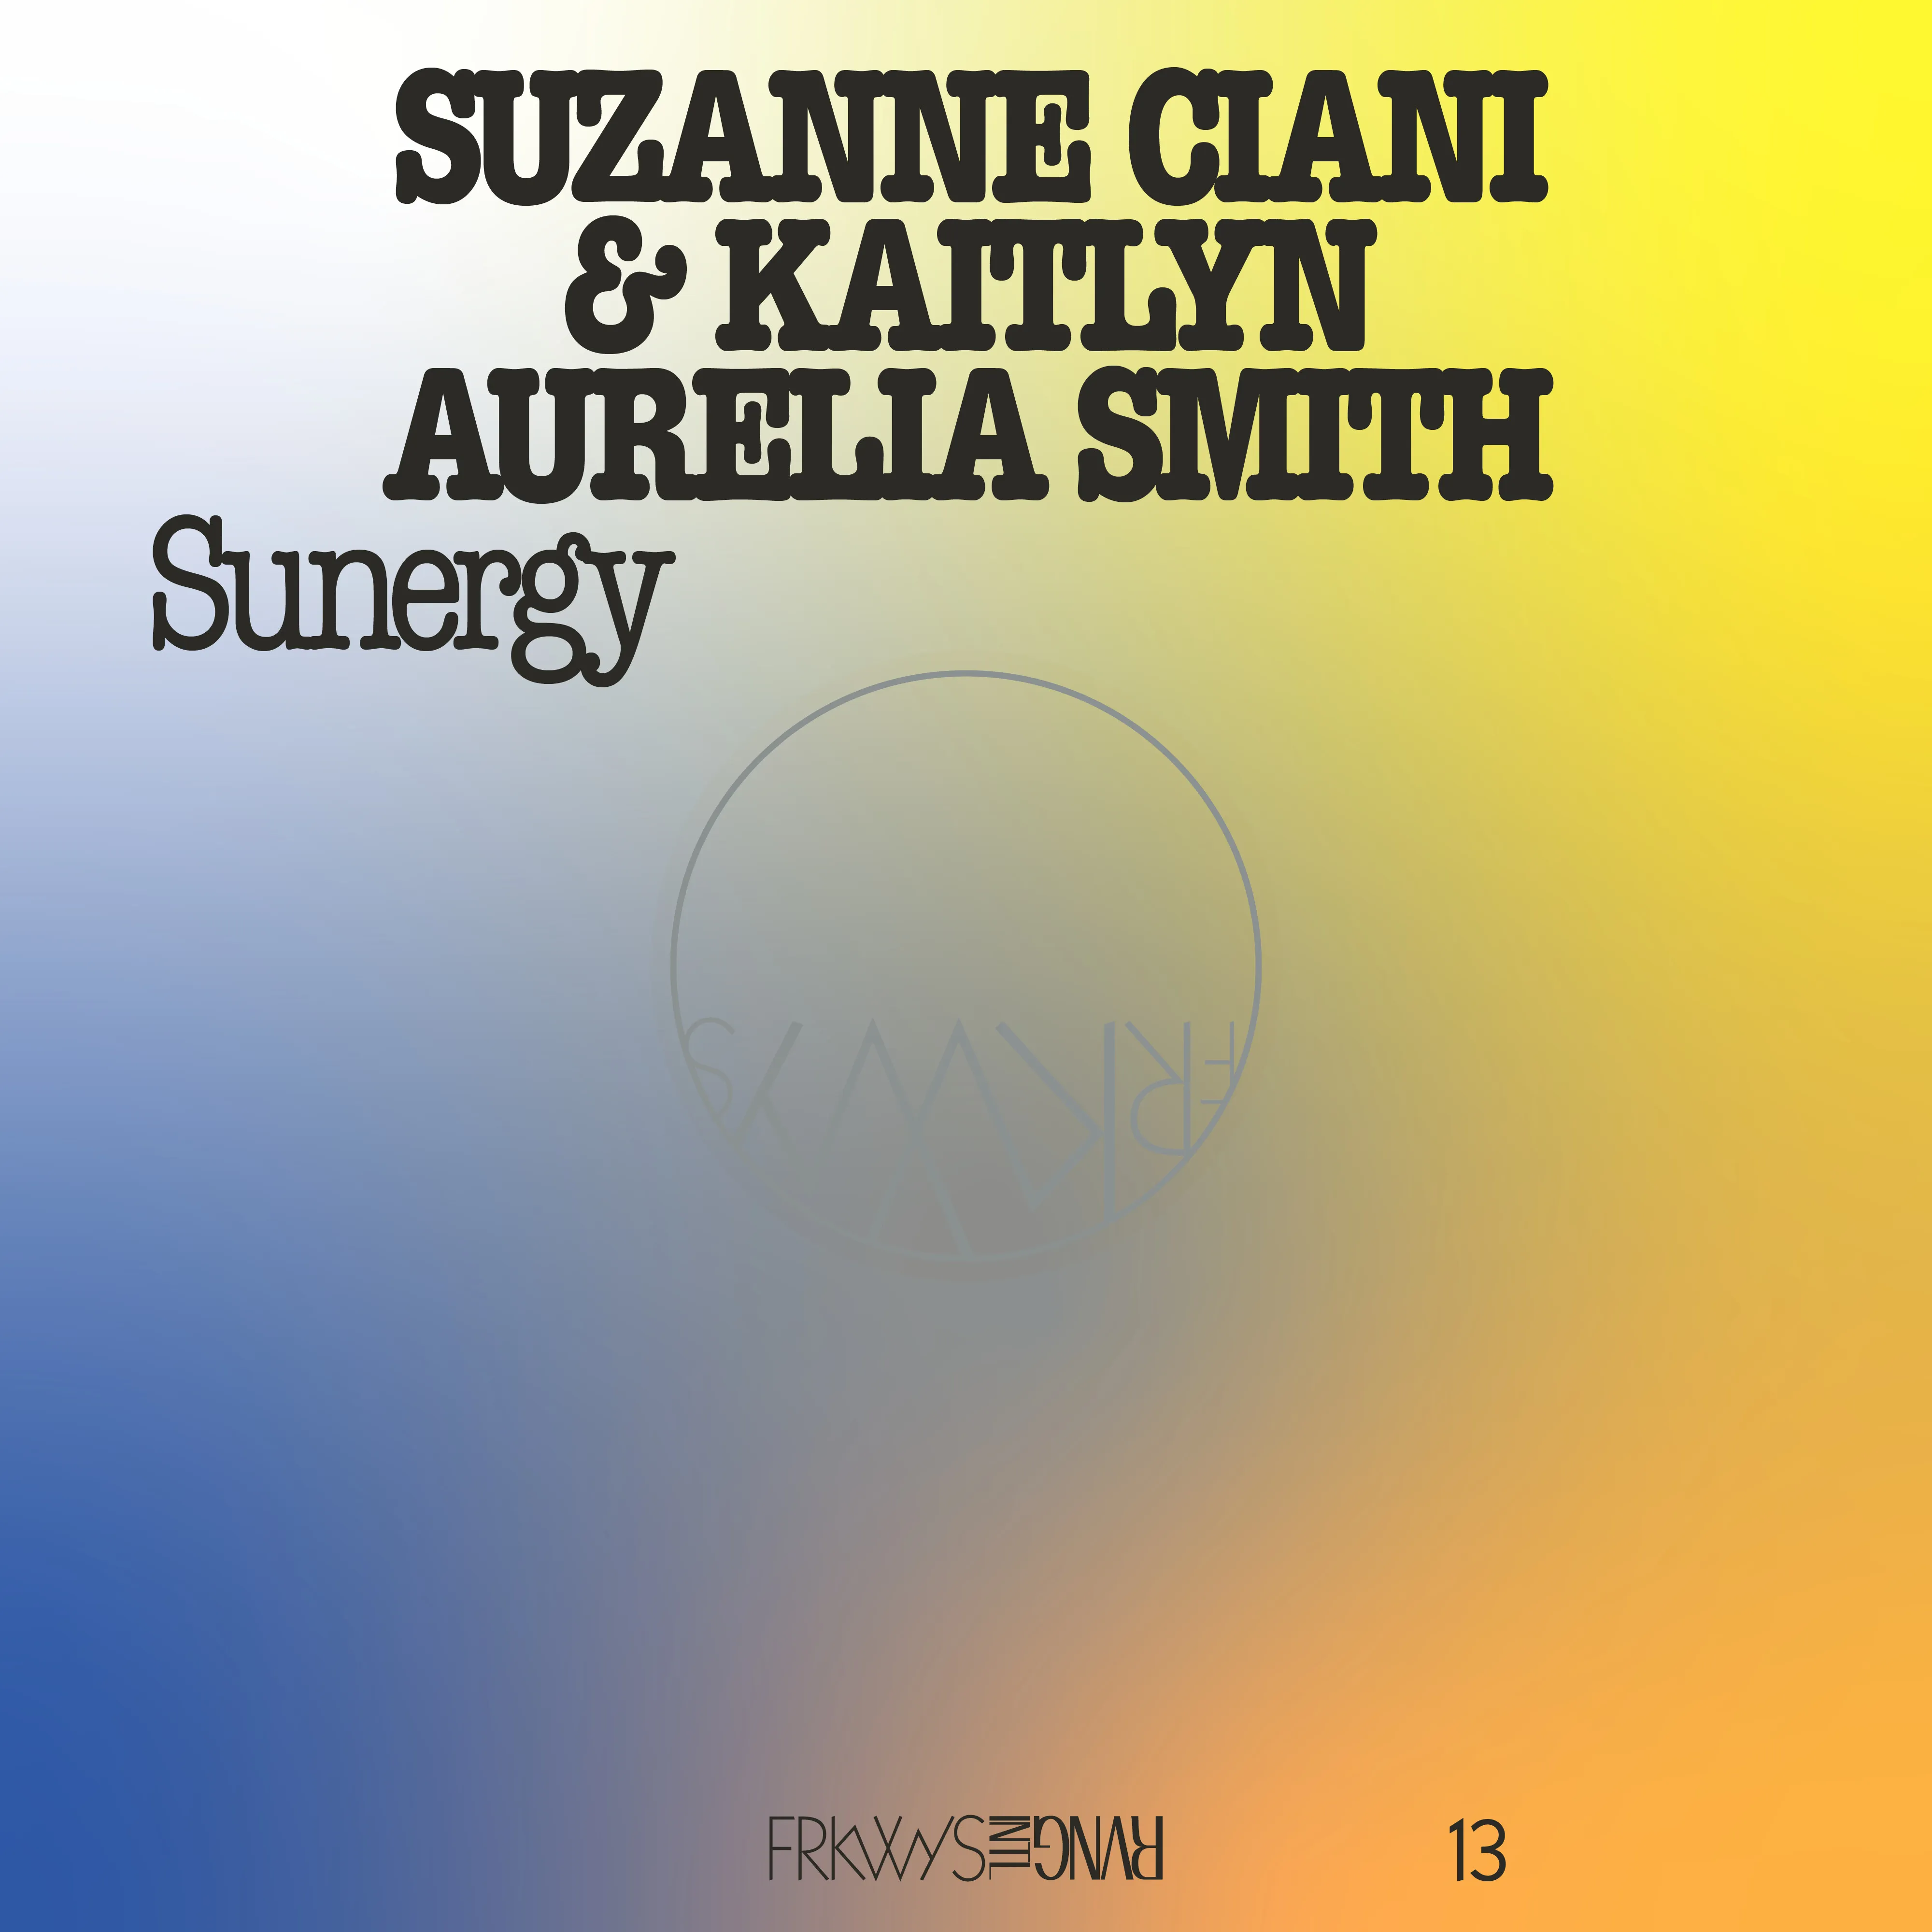 Suzanne Ciani & Kaitlyn Aurelia Smith - FRKWYS Vol. 13 - Sunergy (Expanded) : LP(blue) + DOWNLOAD CODE